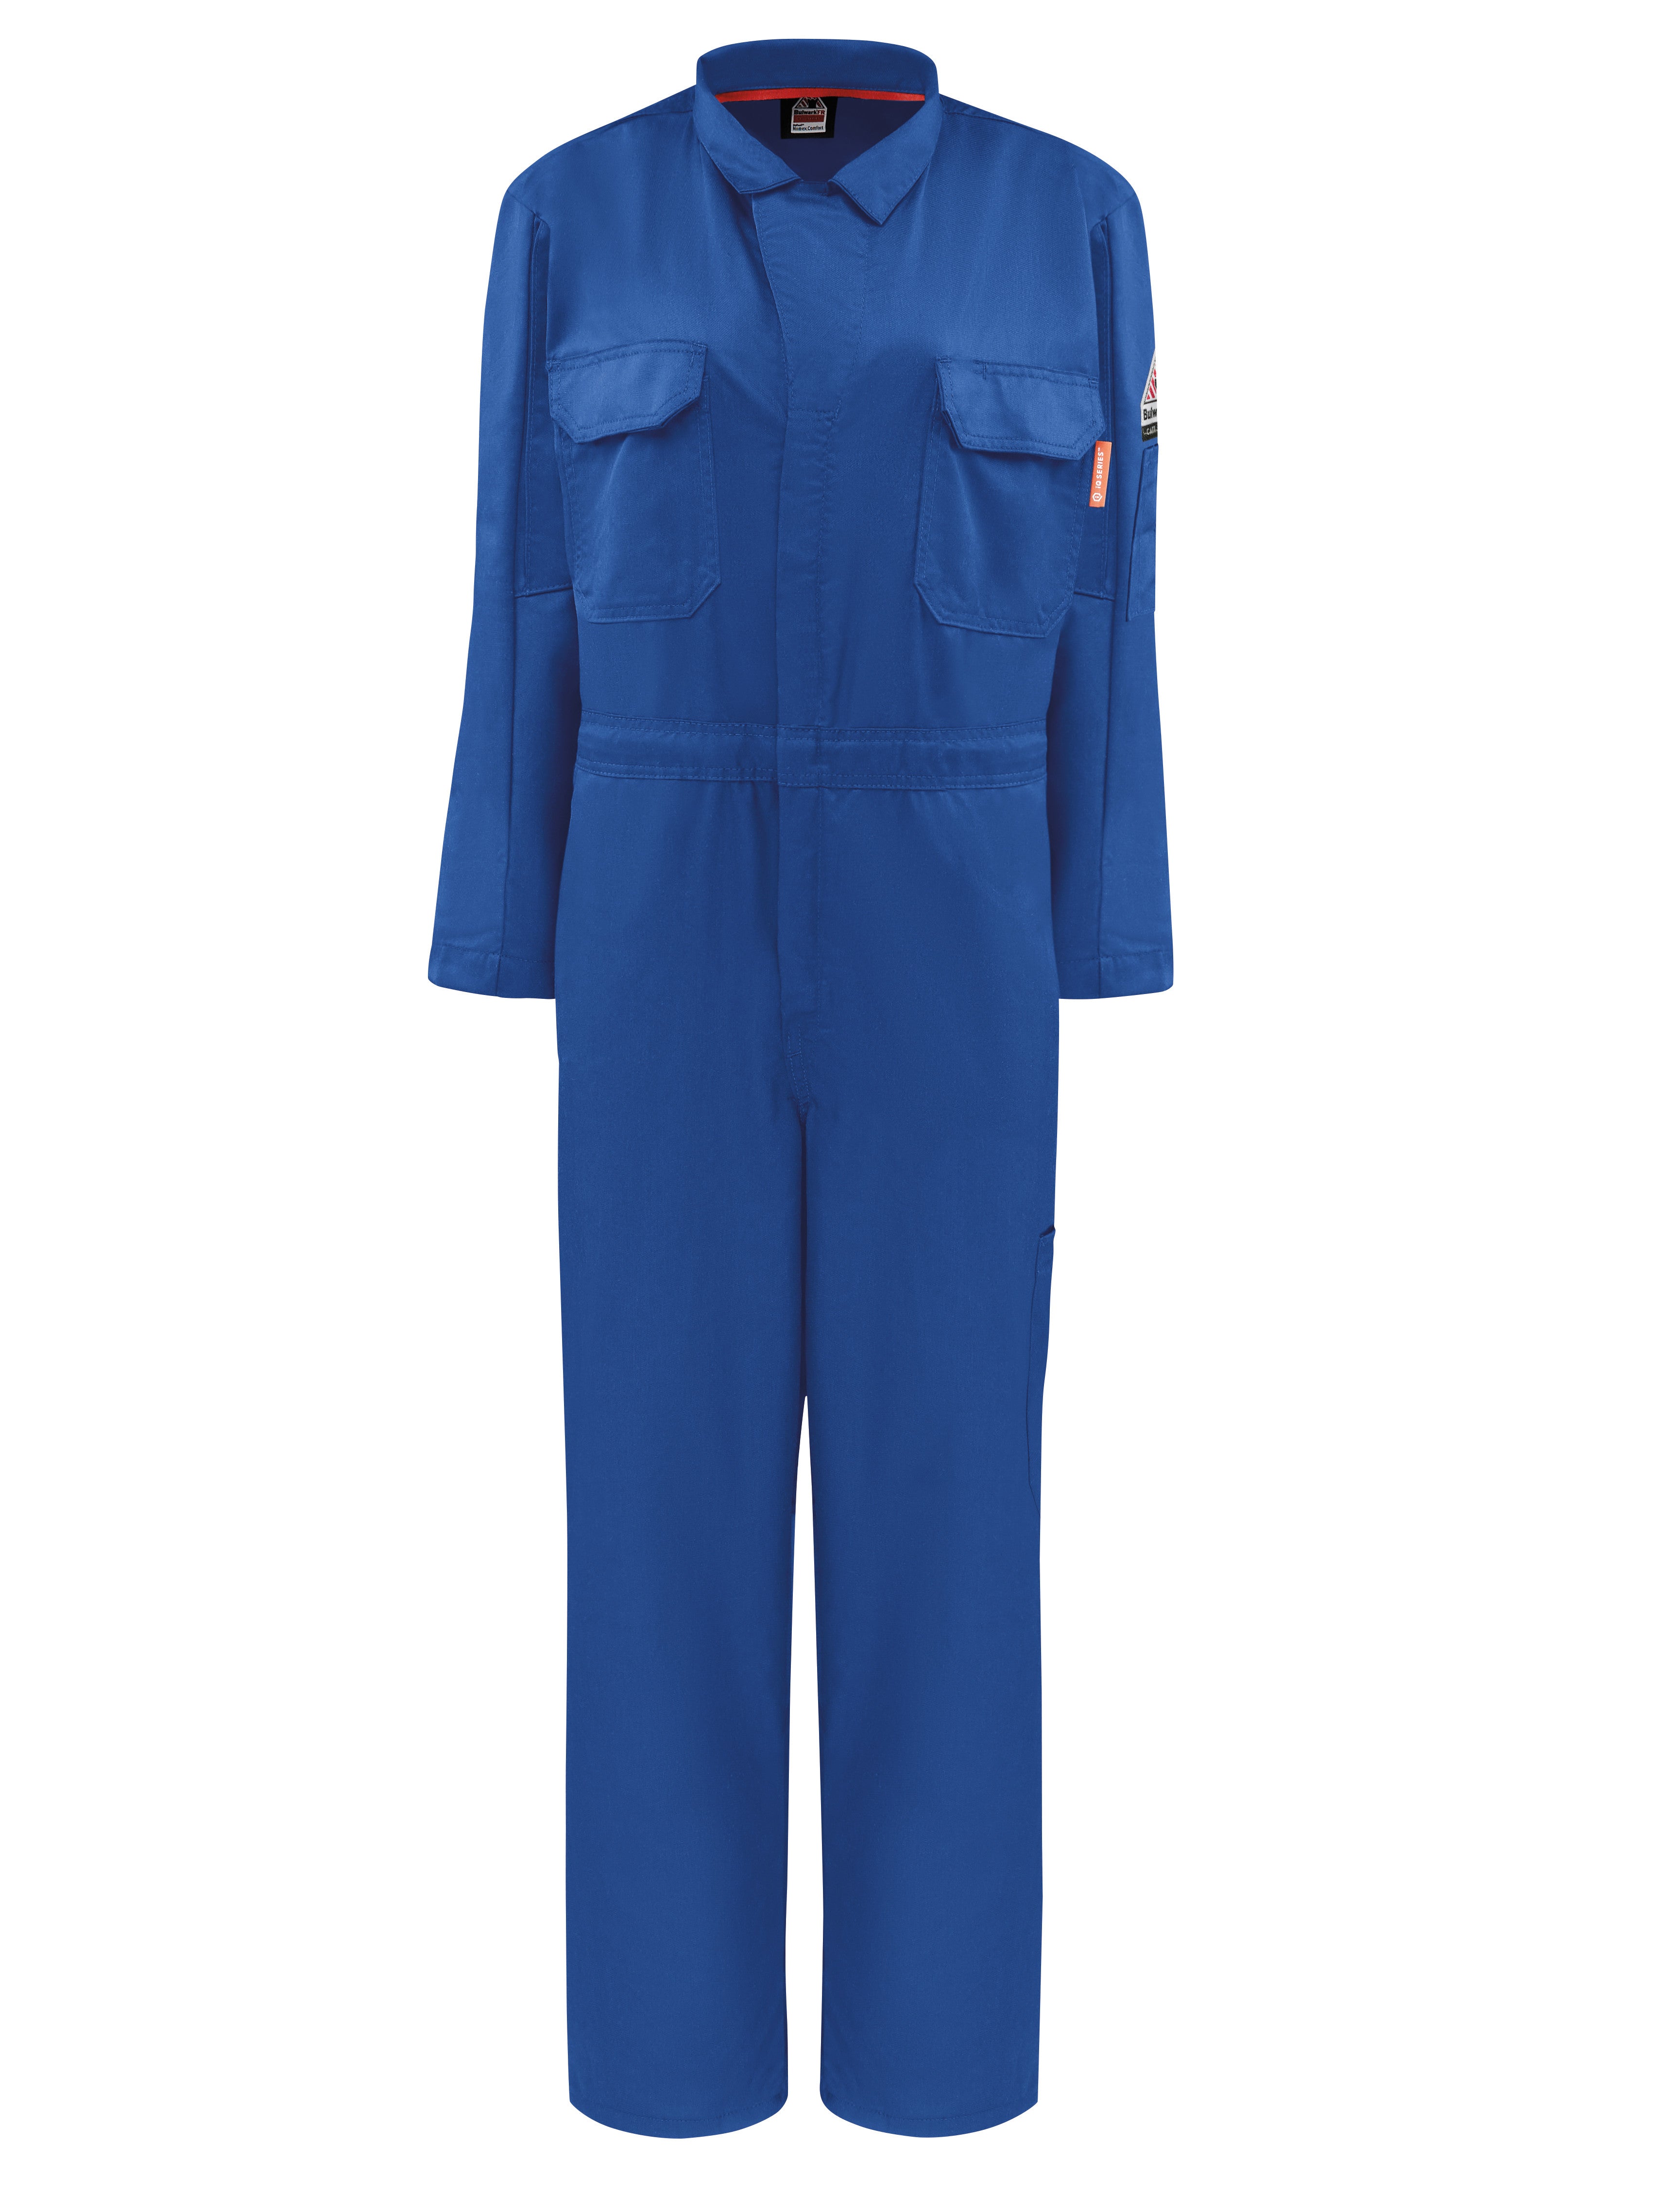 Coverall - UnInsulated QC23 - Royal